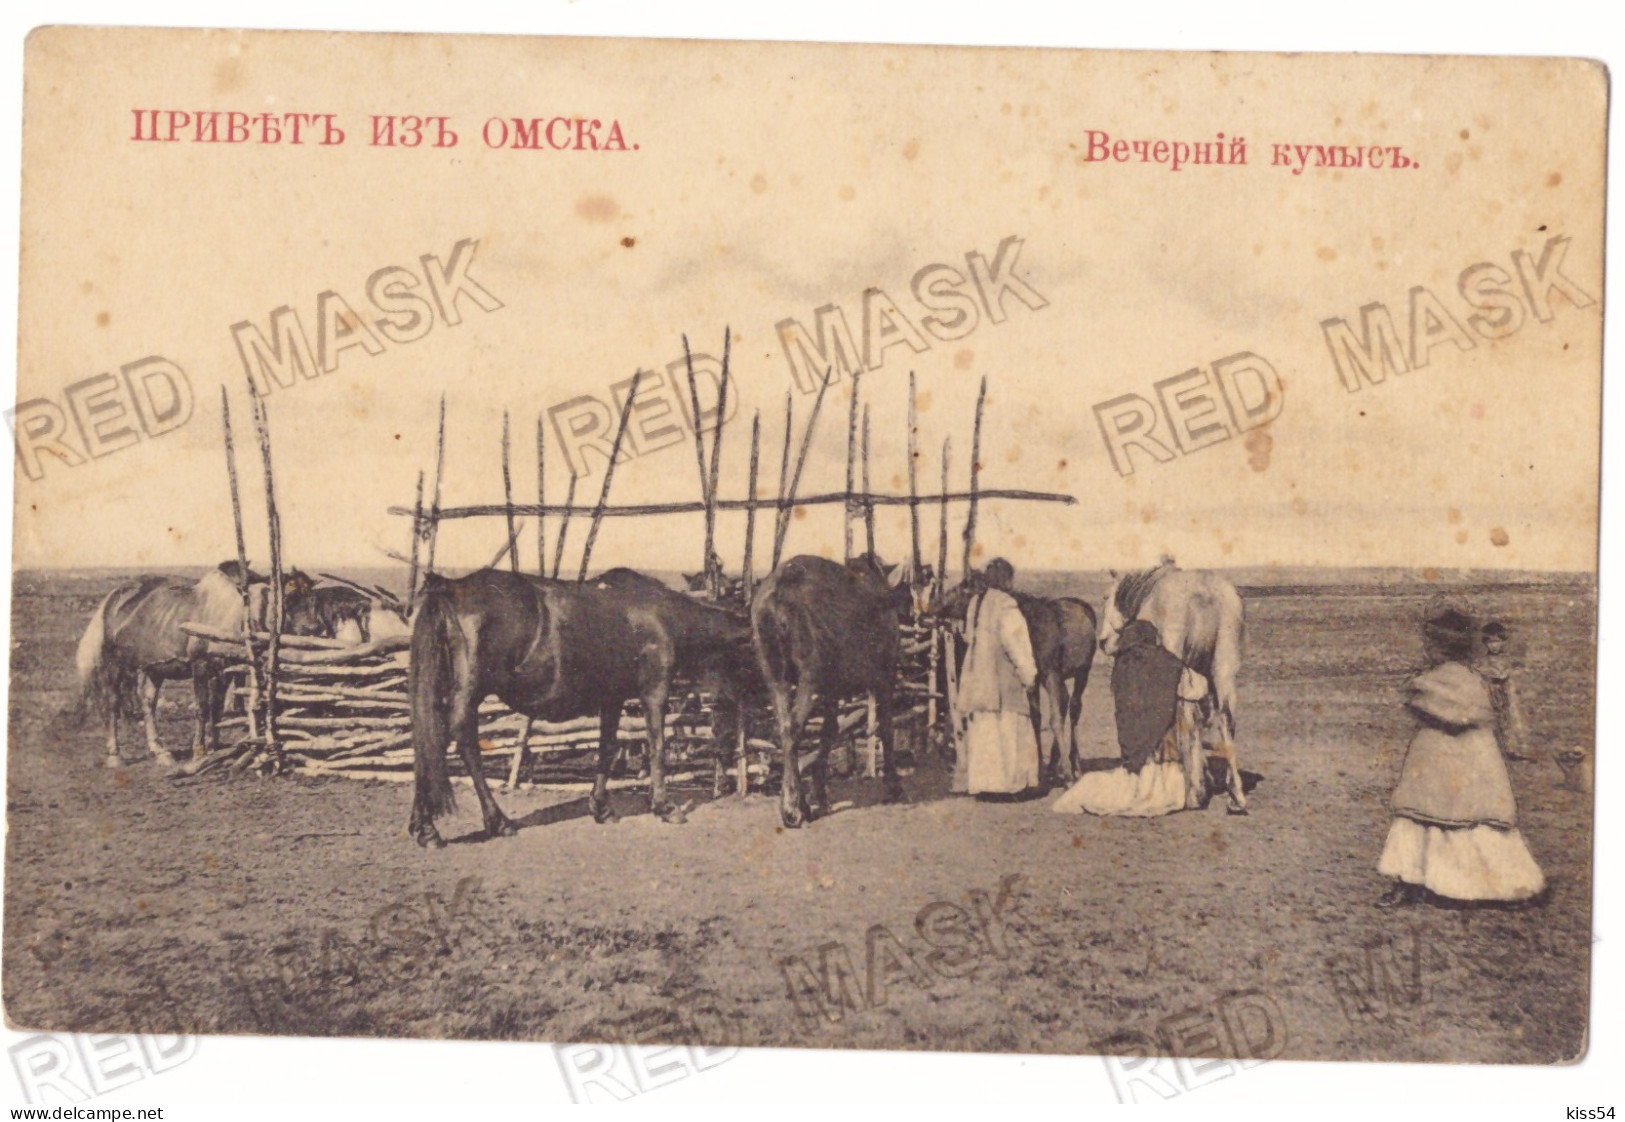 RUS 60 - 22245 OMSK Ethnic With Horses, Russia - Old Postcard - Unused - Rusia